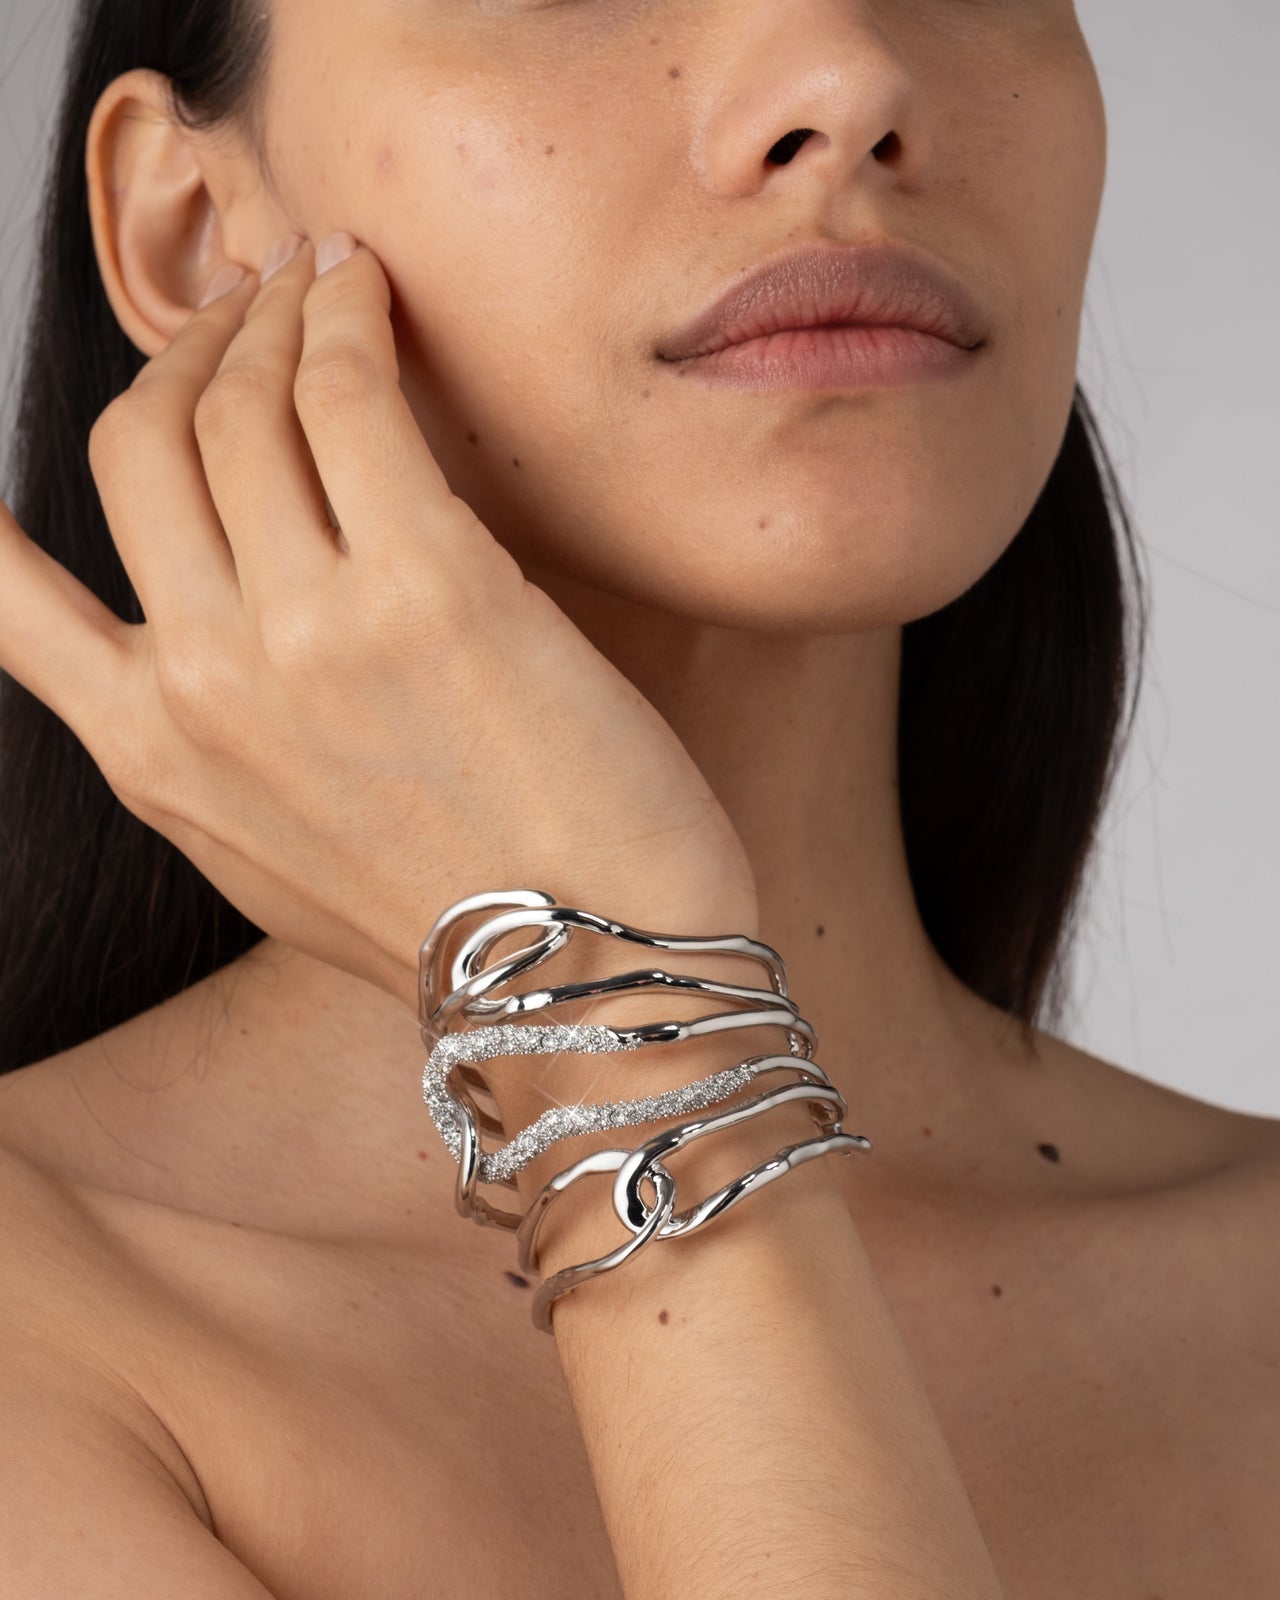 Solanales Large Twisted Cuff Bracelet - Silver - Photo 2